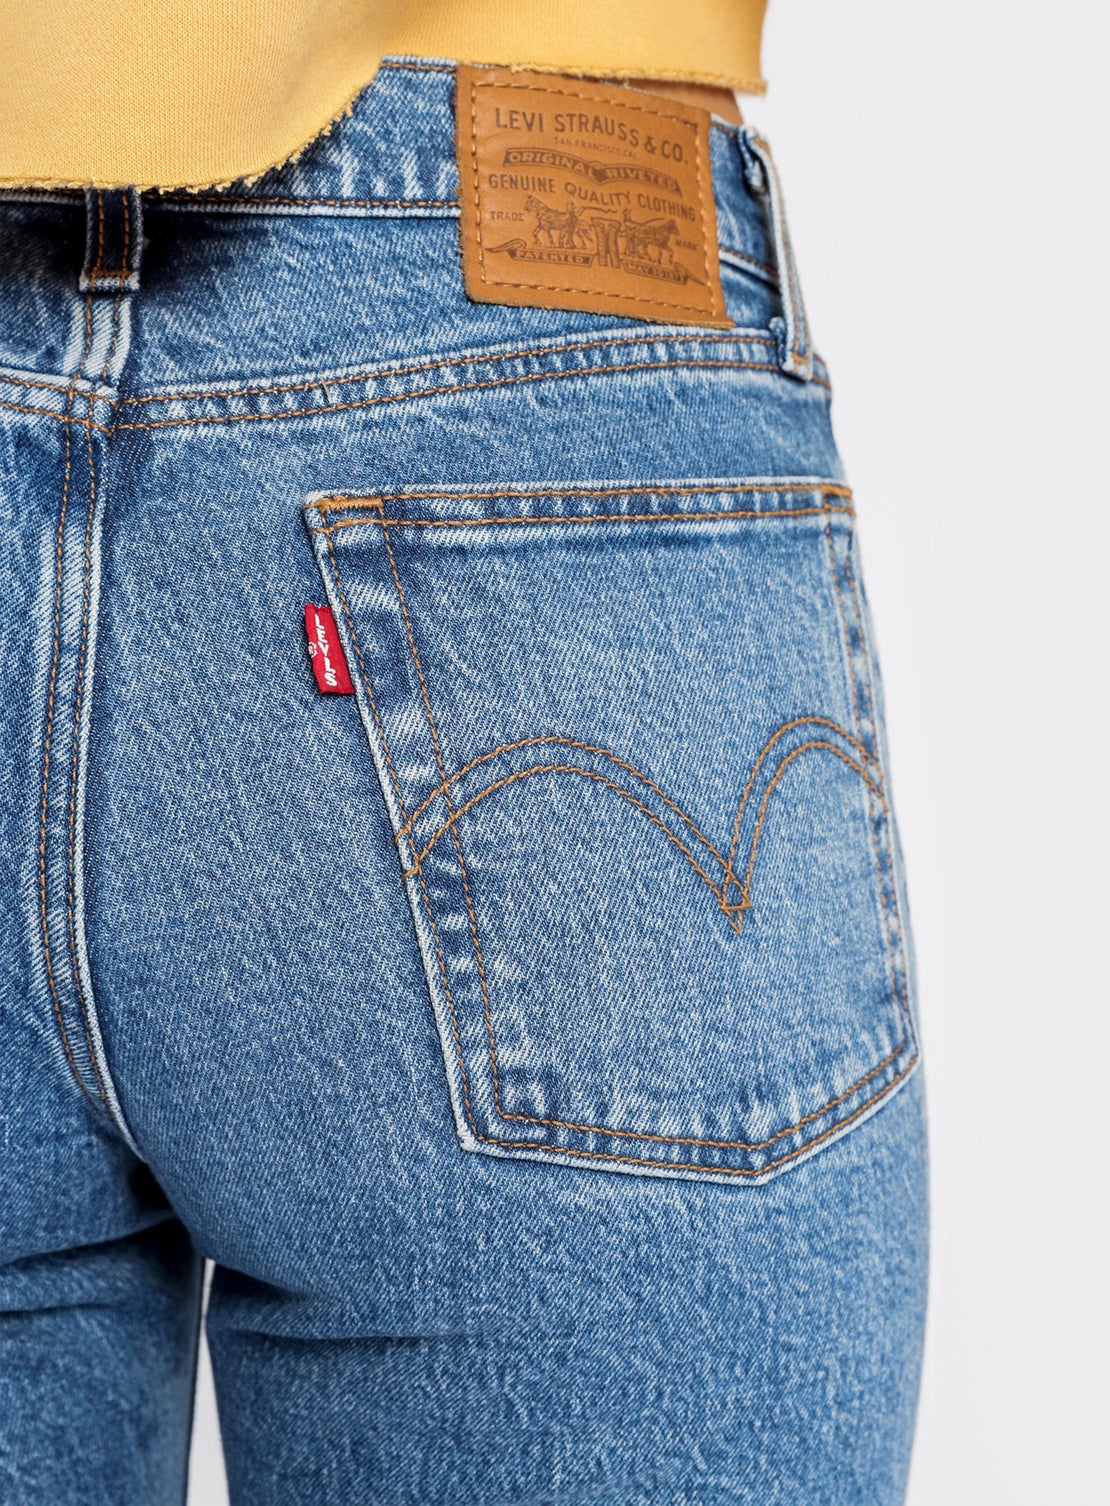 Levi's Wedgie Fit Straight Jeans - Jive Sound